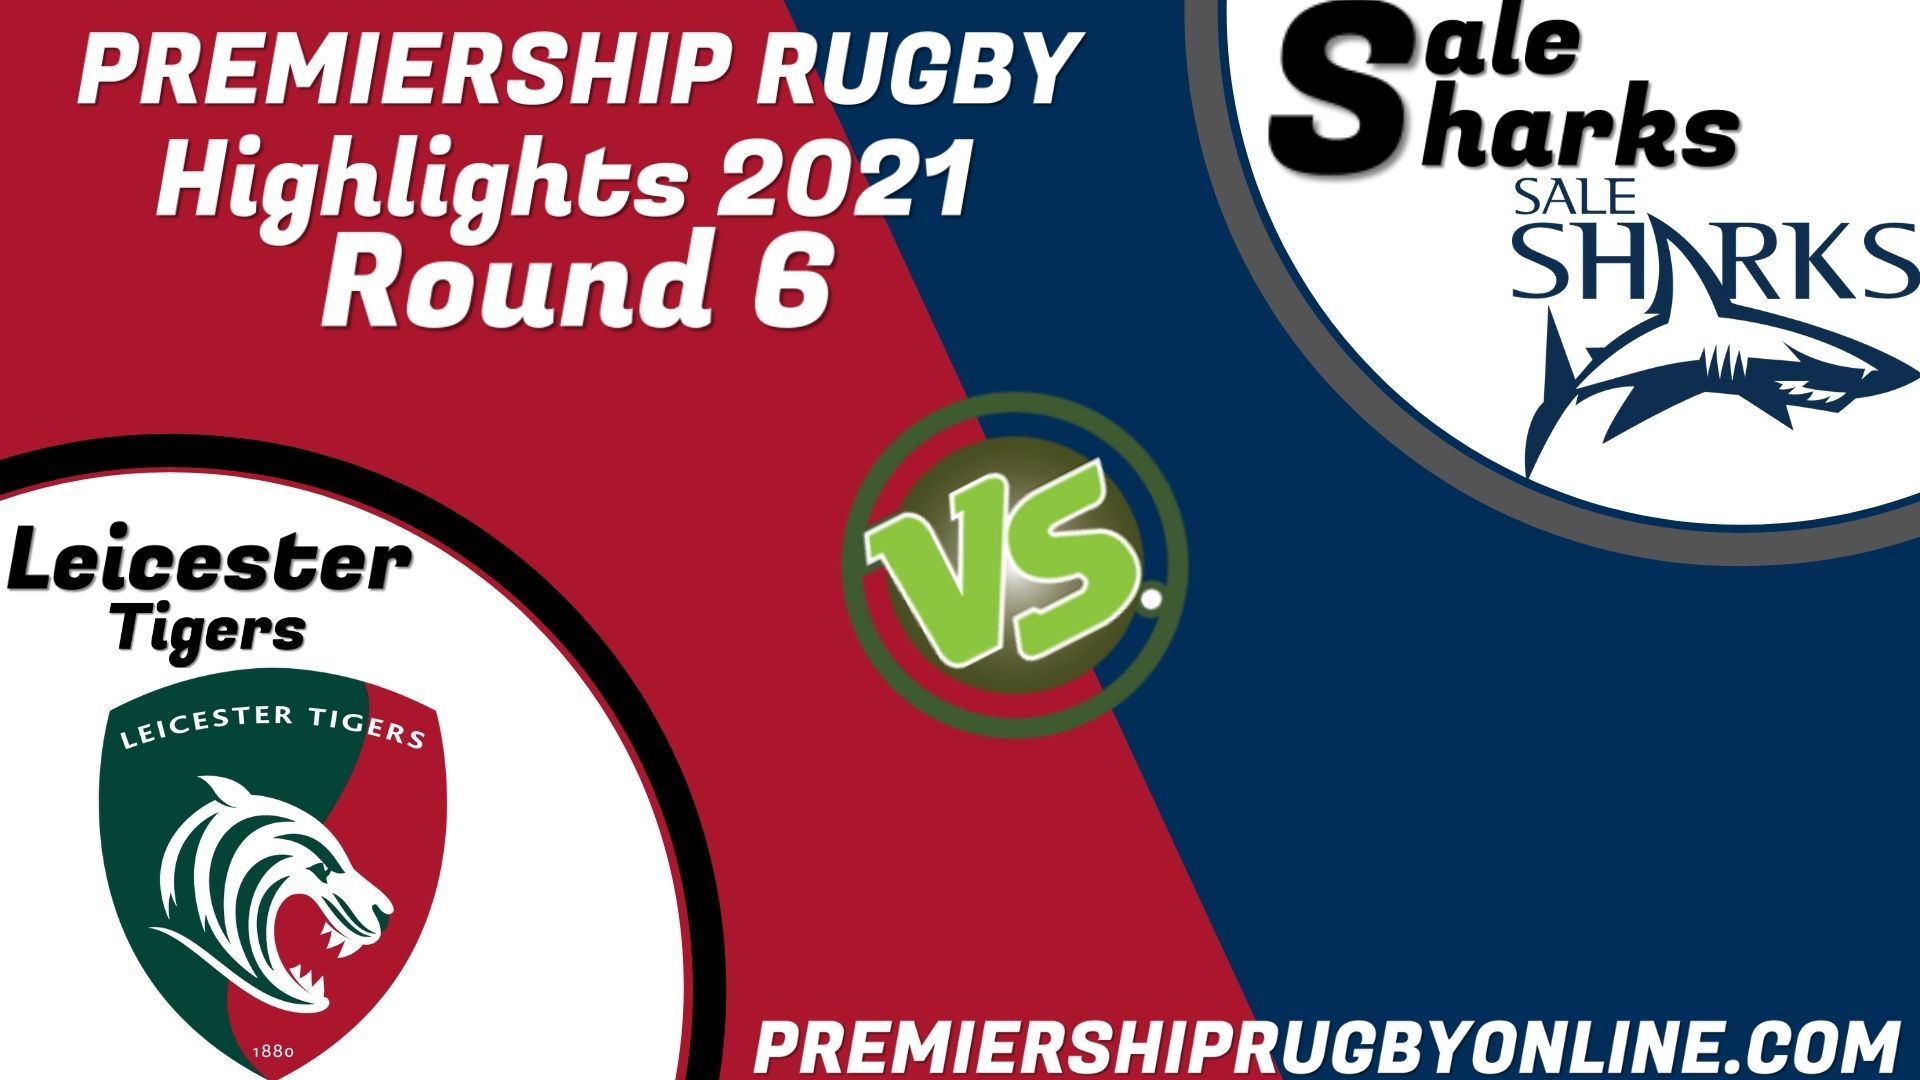 Leicester Tigers Vs Sale Sharks Highlights 2021 RD 6